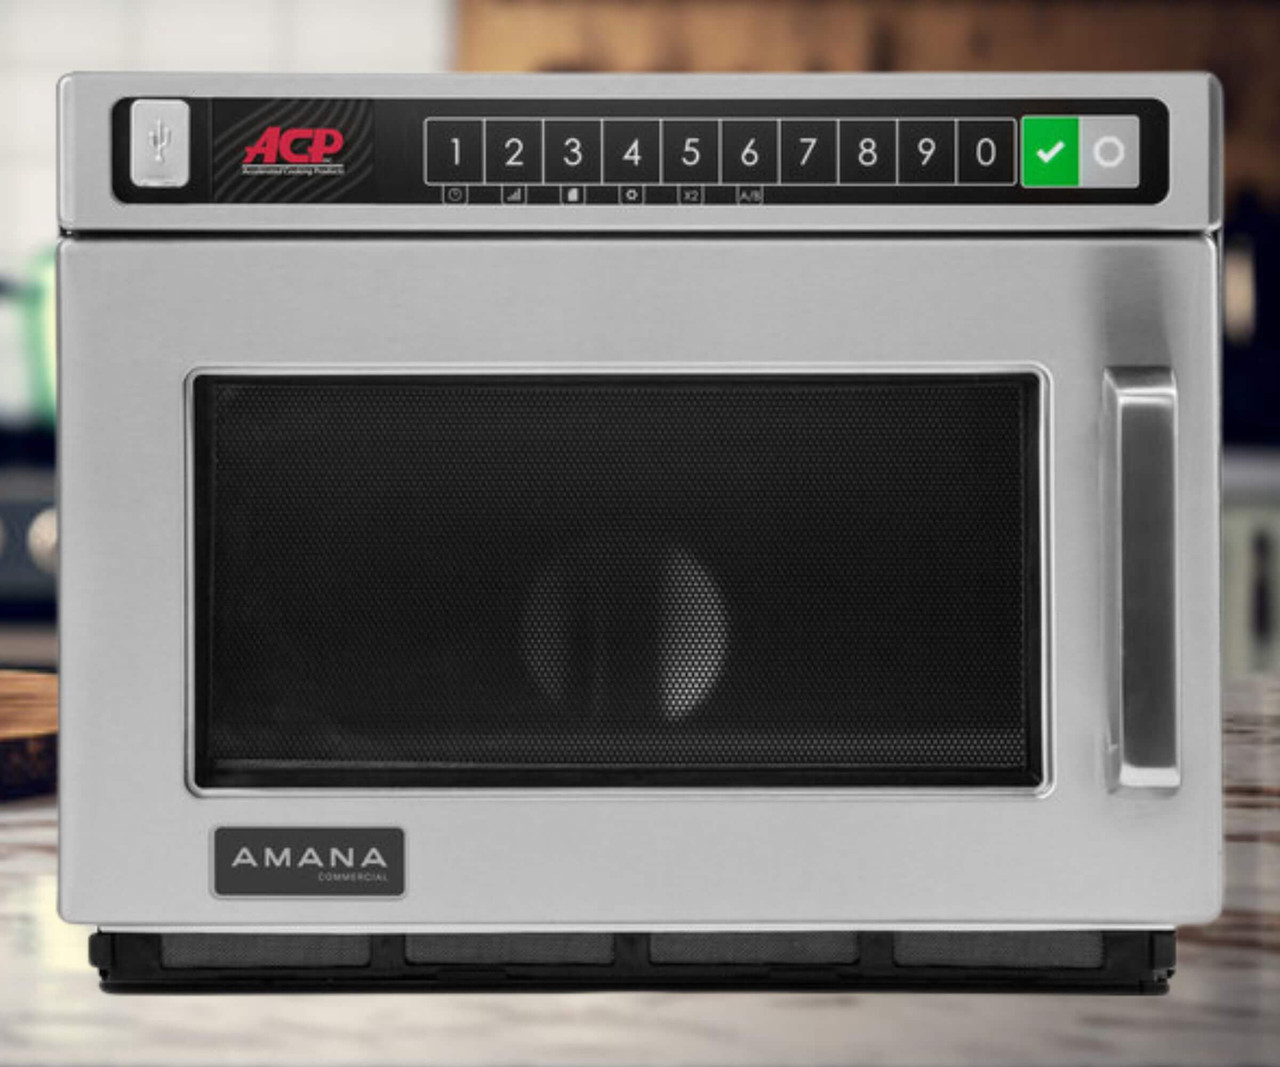 Amana Heavy-Duty Stainless Steel Commercial Microwave - 208/240V, 1800W | High-Performance Cooking for Professional Kitchens